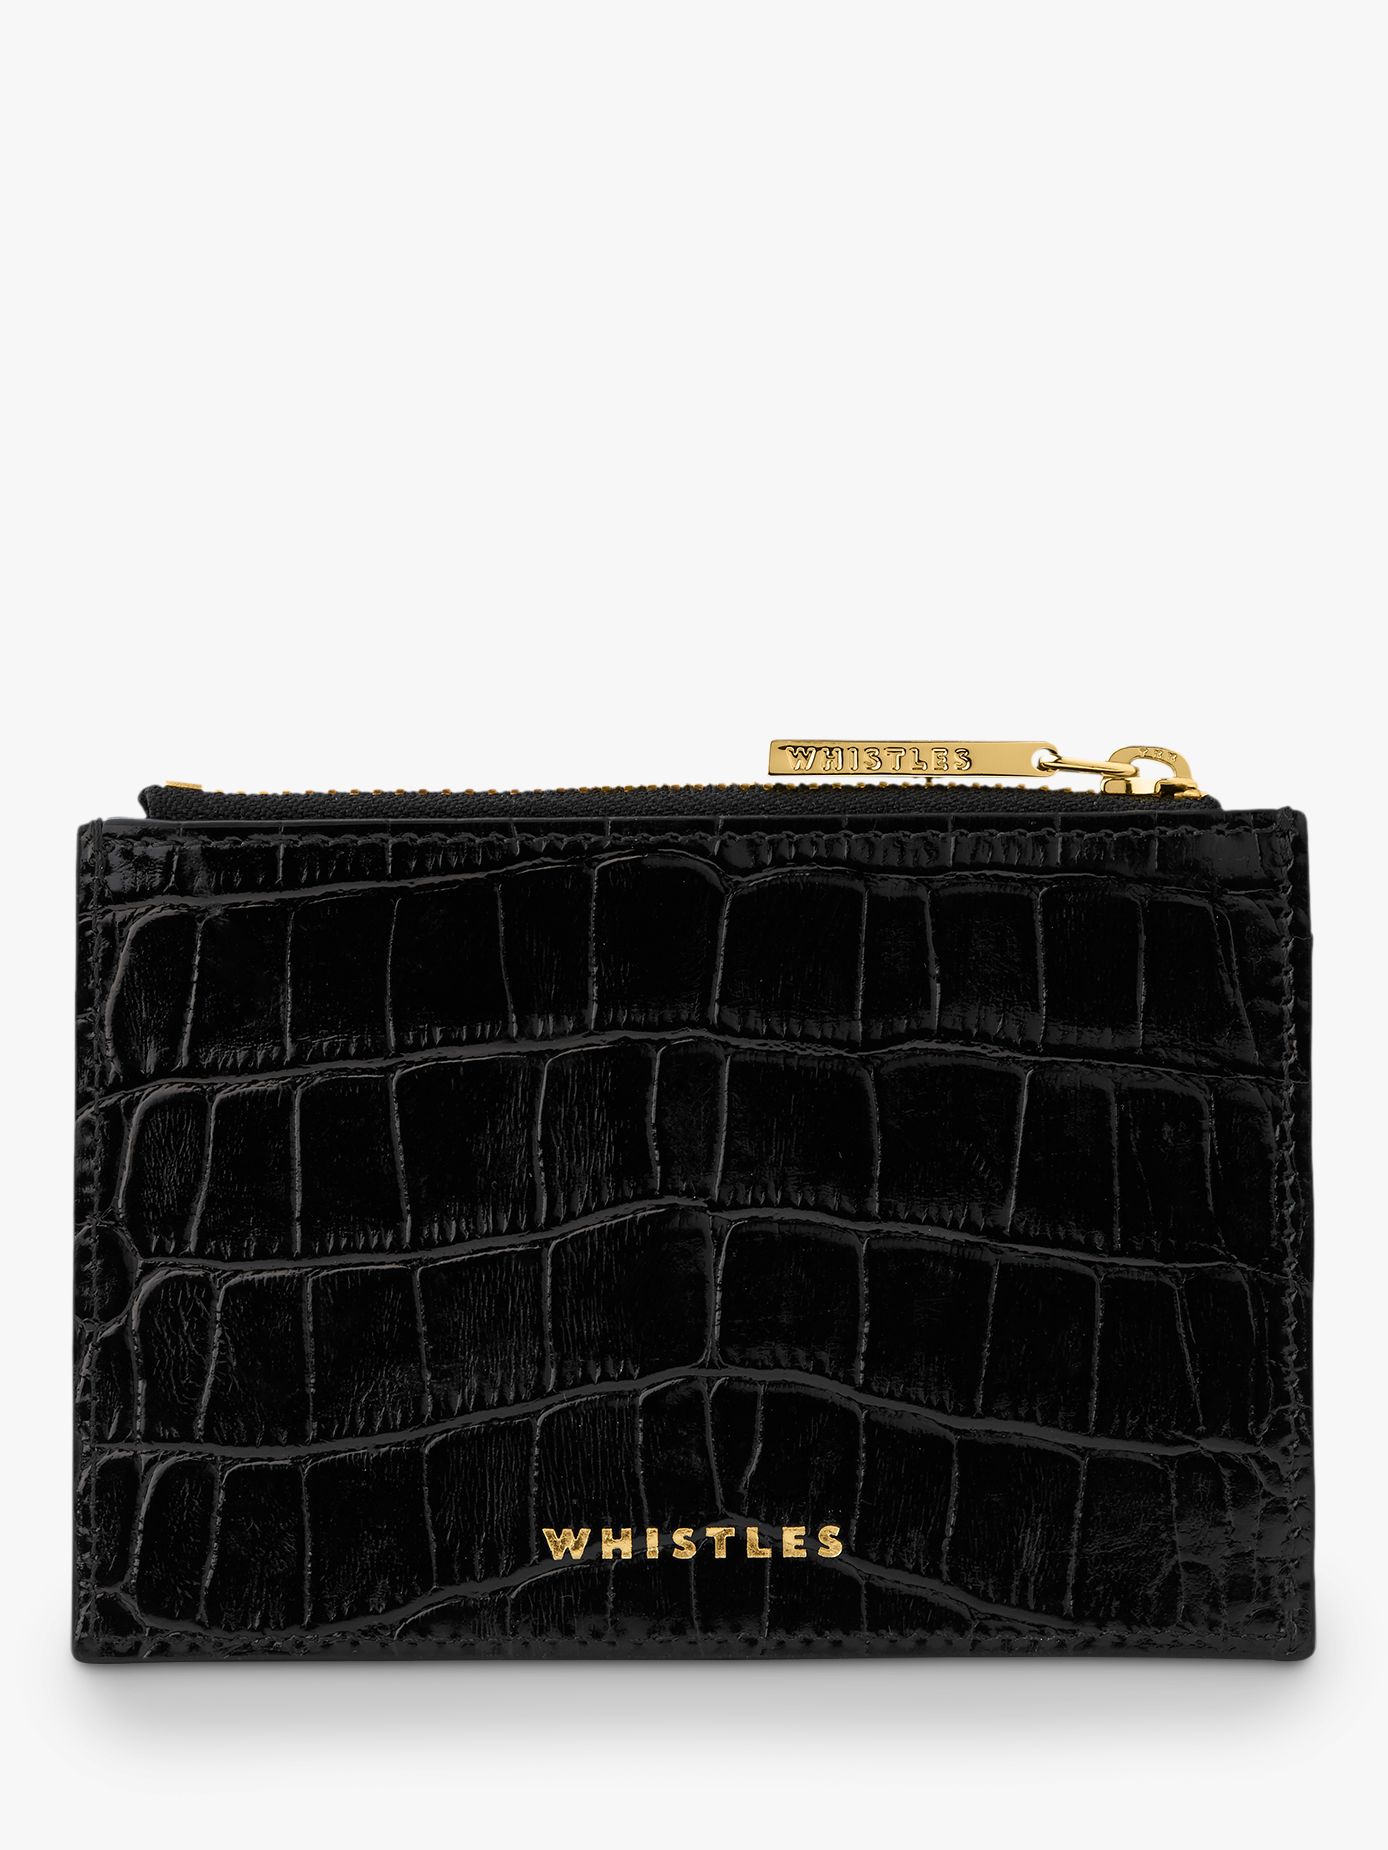 Buy Whistles Shiny Embossed Croc Coin Purse, Black Online at johnlewis.com